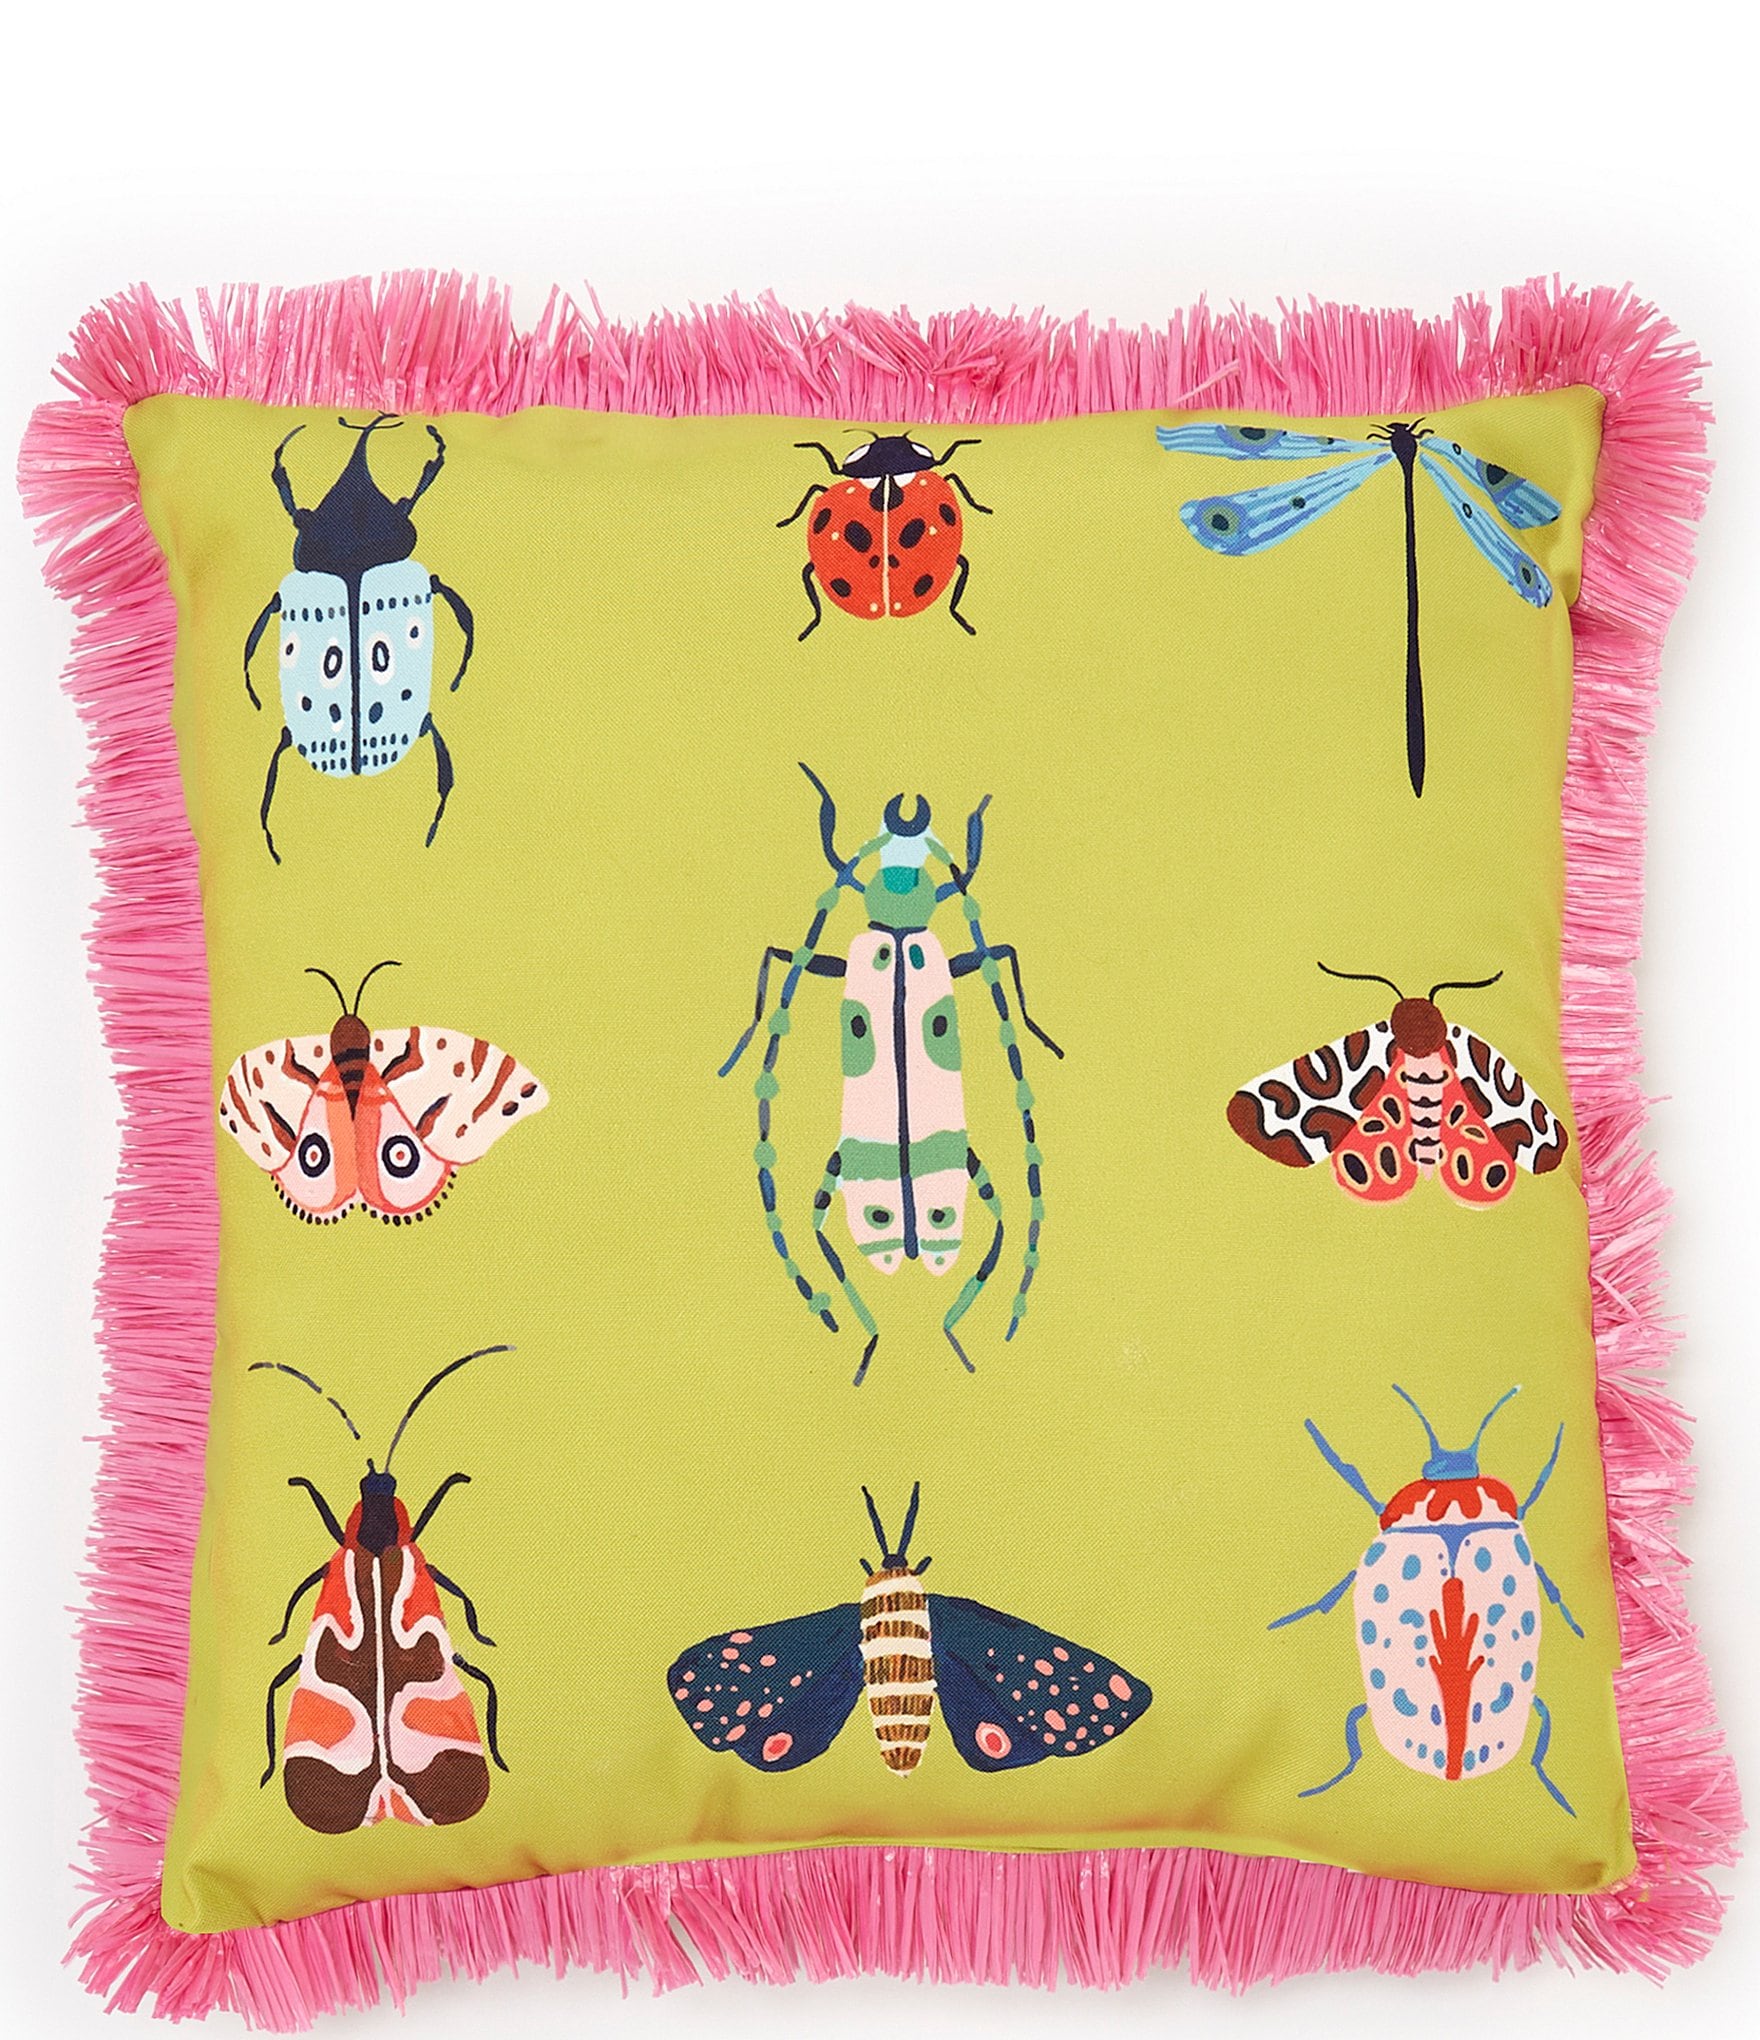 Southern Living Outdoor Living Collection Colorful Insect Indoor/Outdoor Pillow | Dillard's